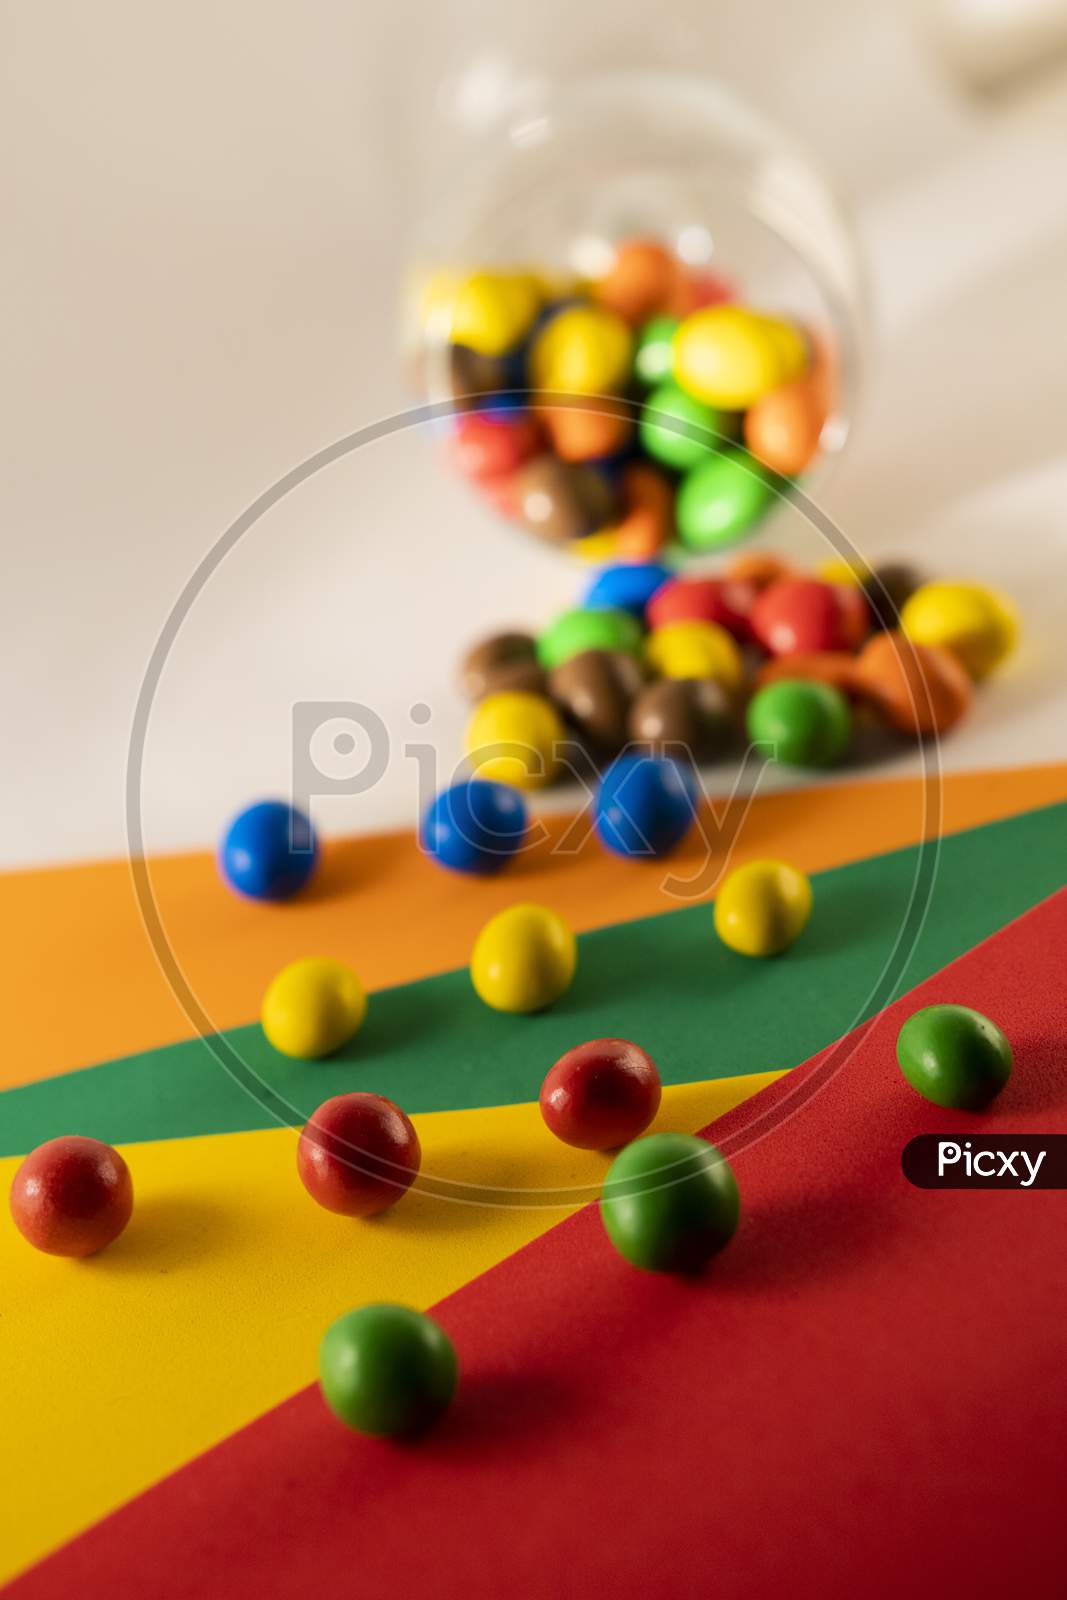 Multi color chocolate candy or candy balls scattered on a multicolored background.